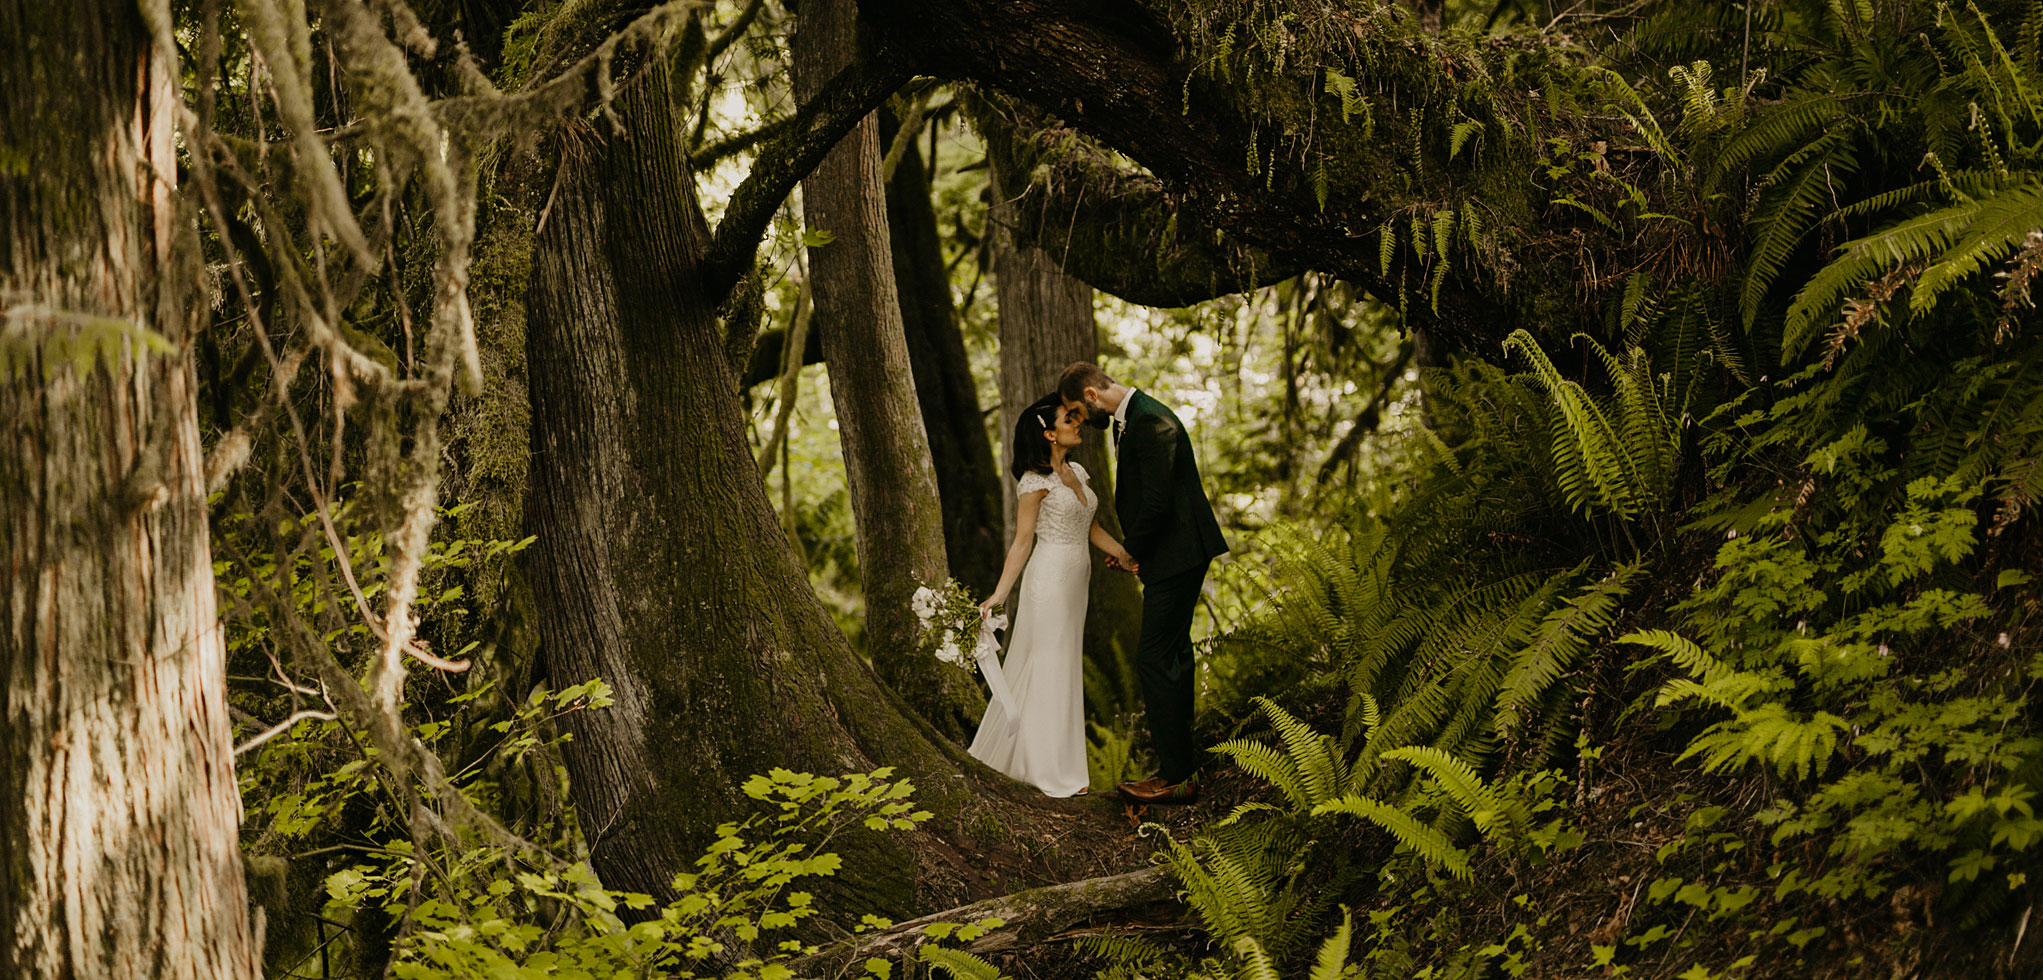 Plan your Wedding at Treehouse Point in Fall City Washington